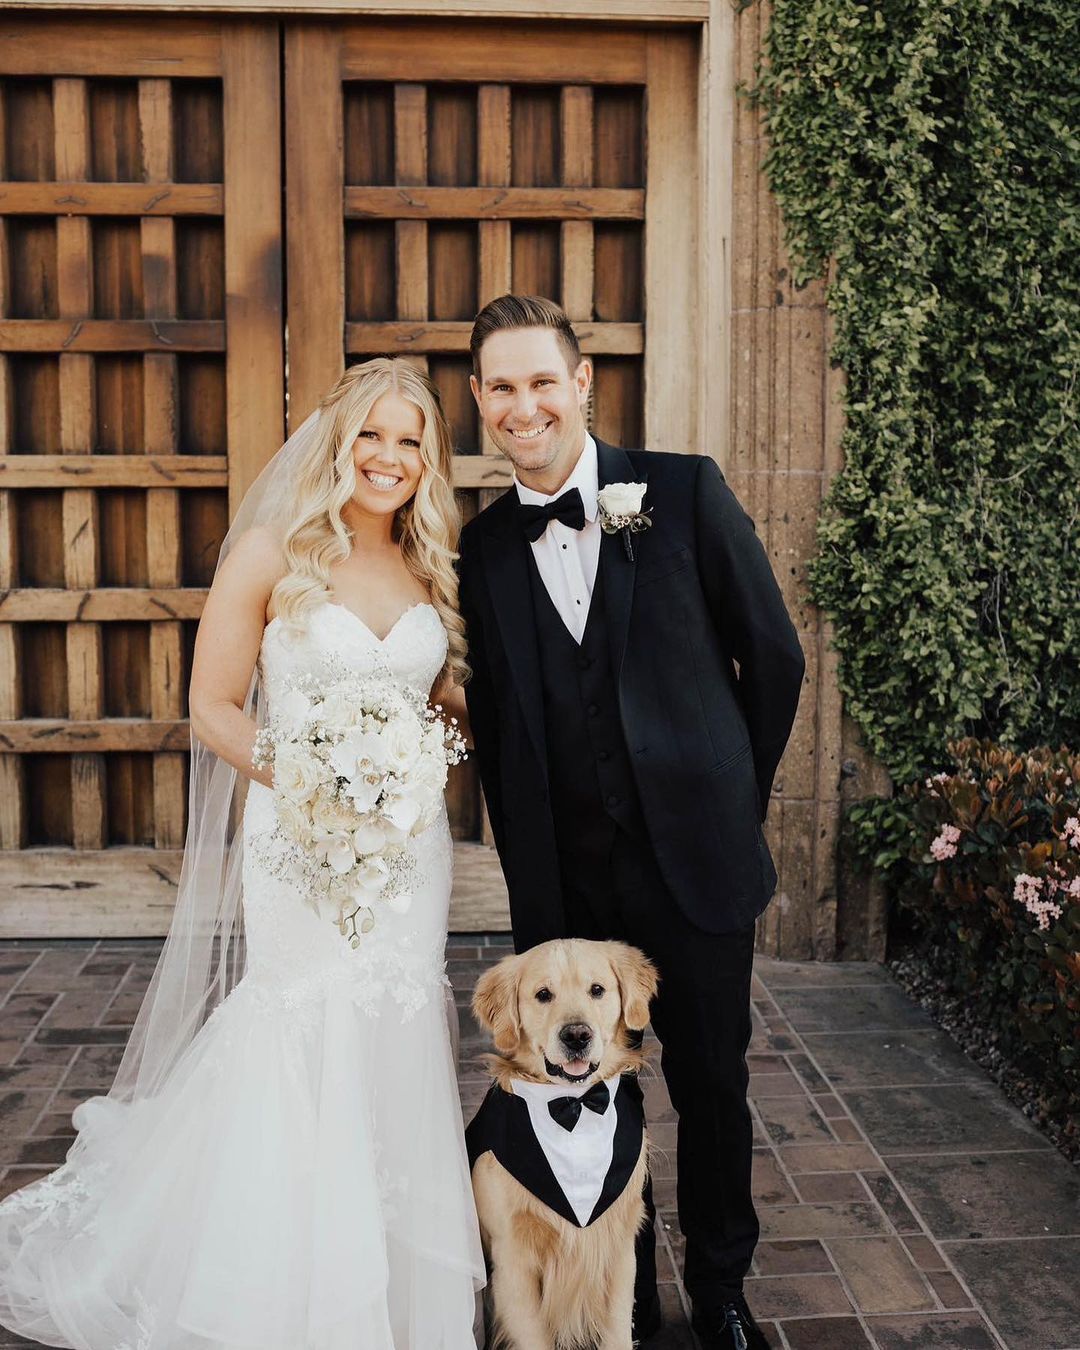 Stephanie And Kyle At Their Wedding With Their Pet Dallas